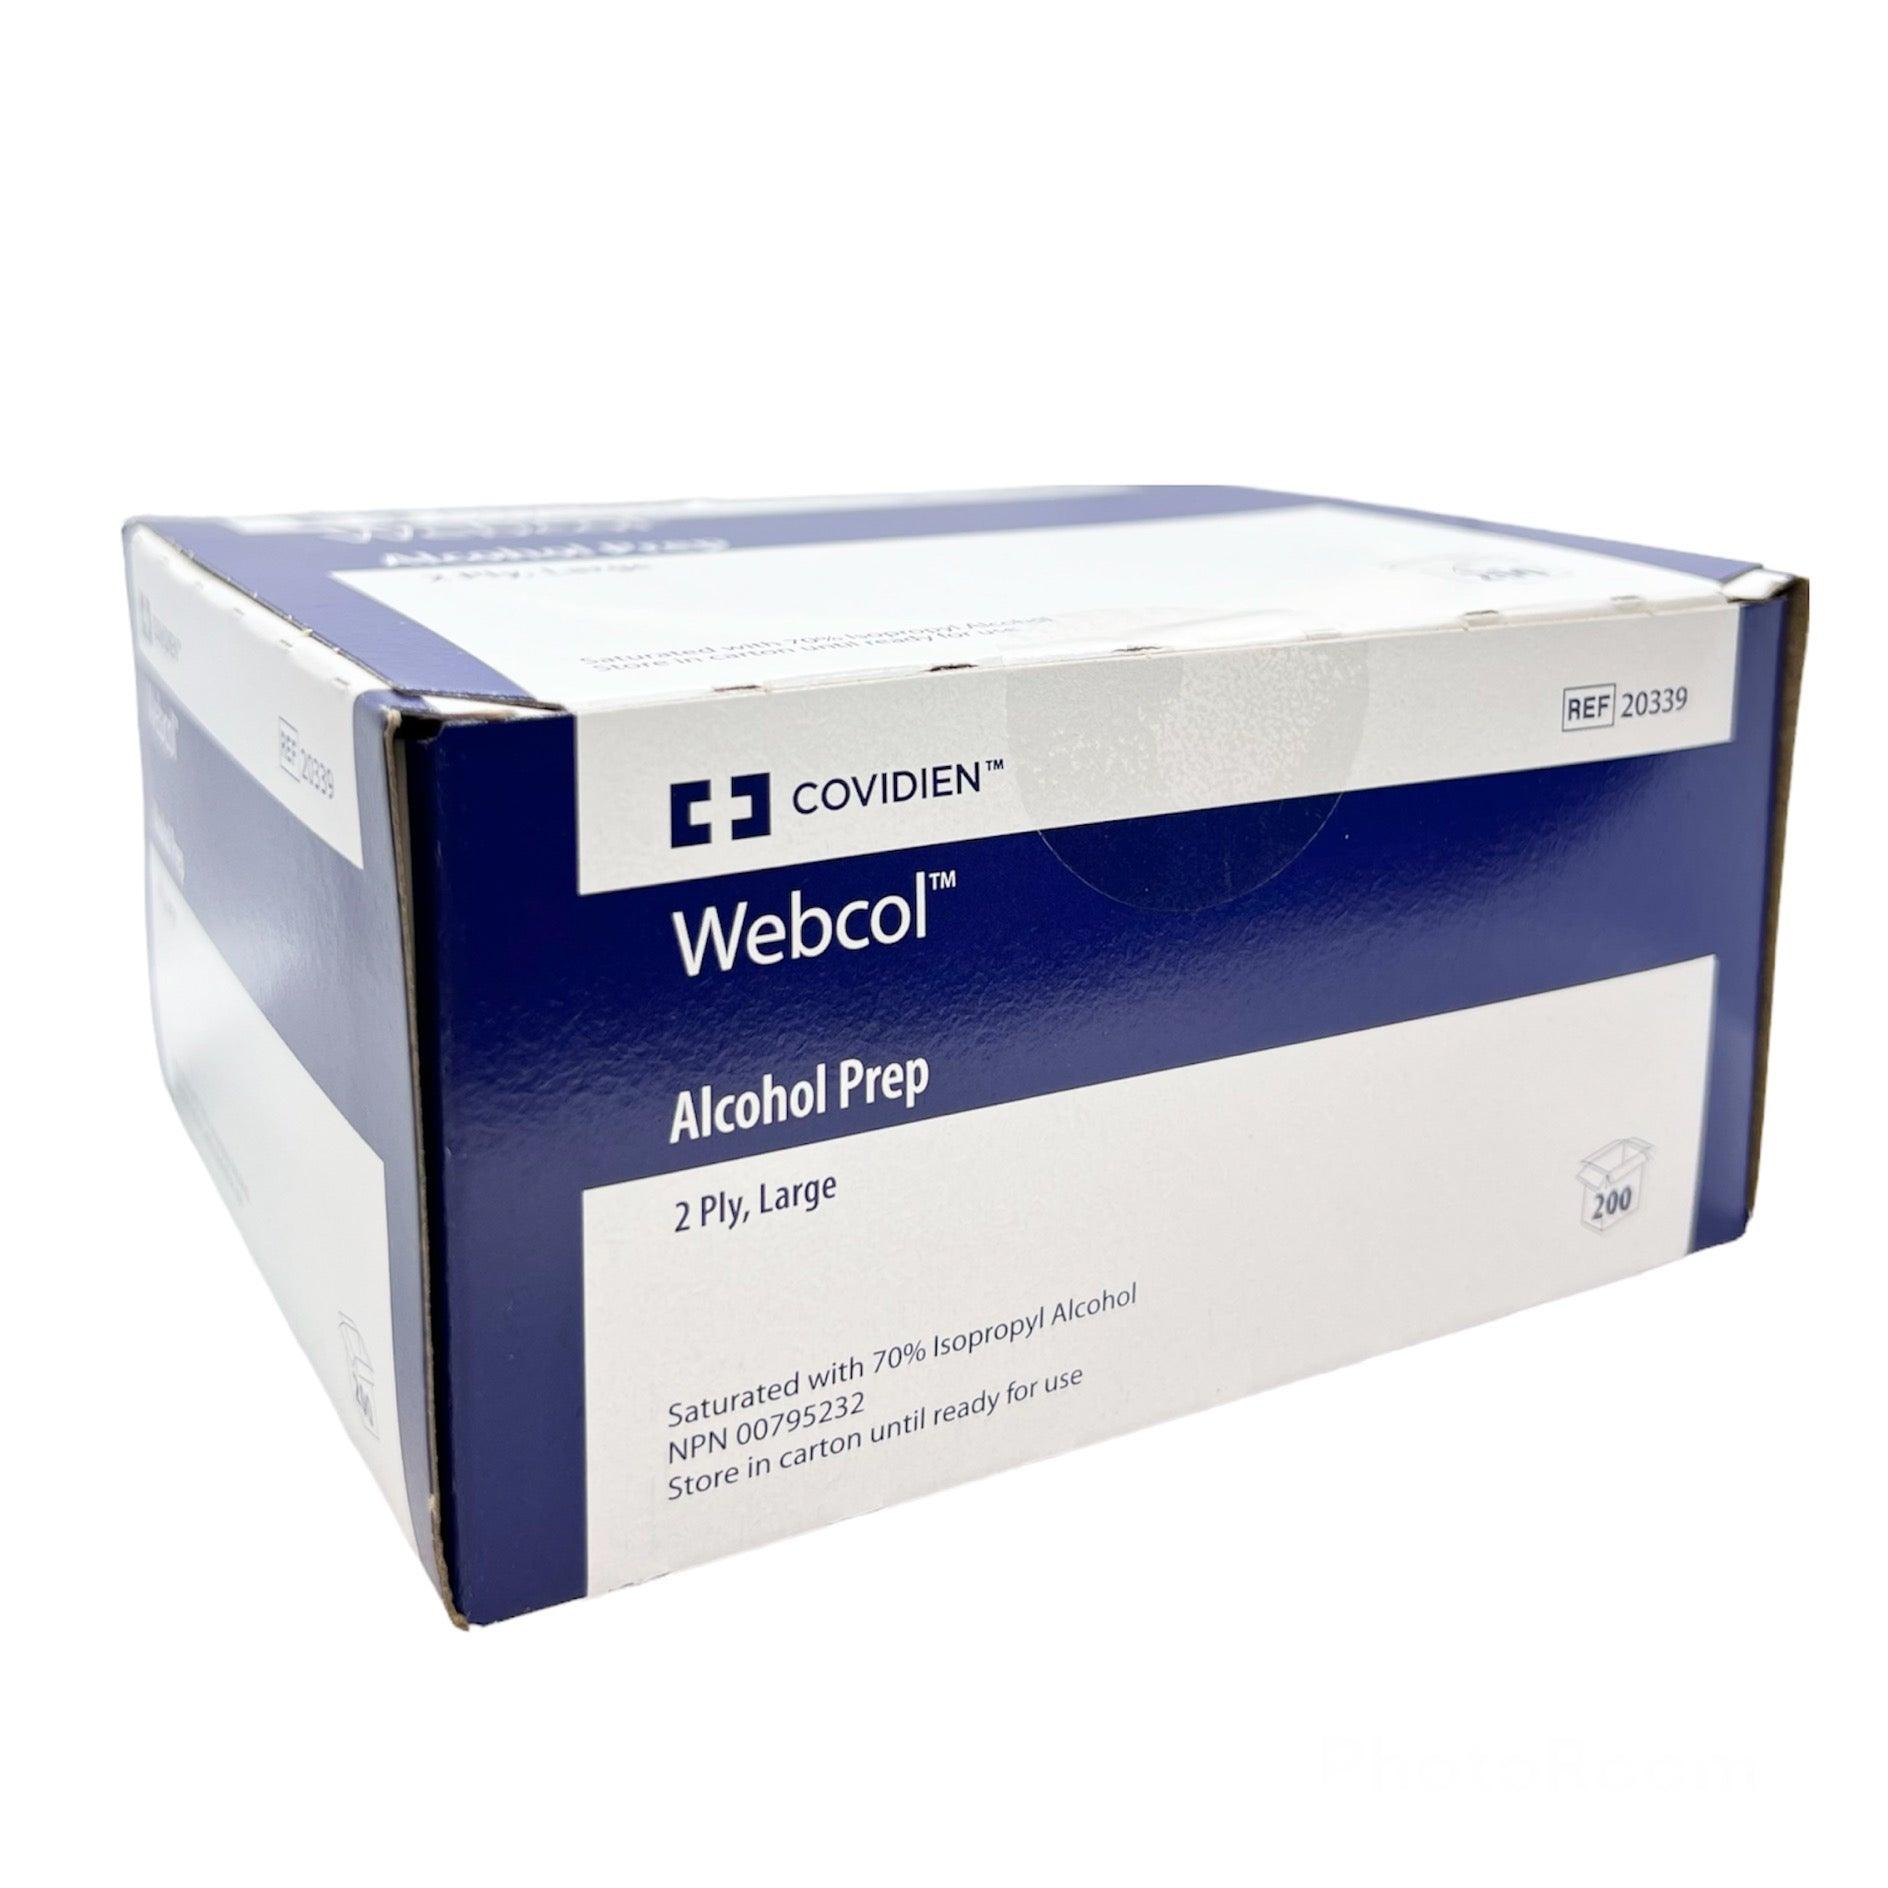 Webcol Sterile 70% Alcohol Prep Pad Two-Ply - Large (200pads)